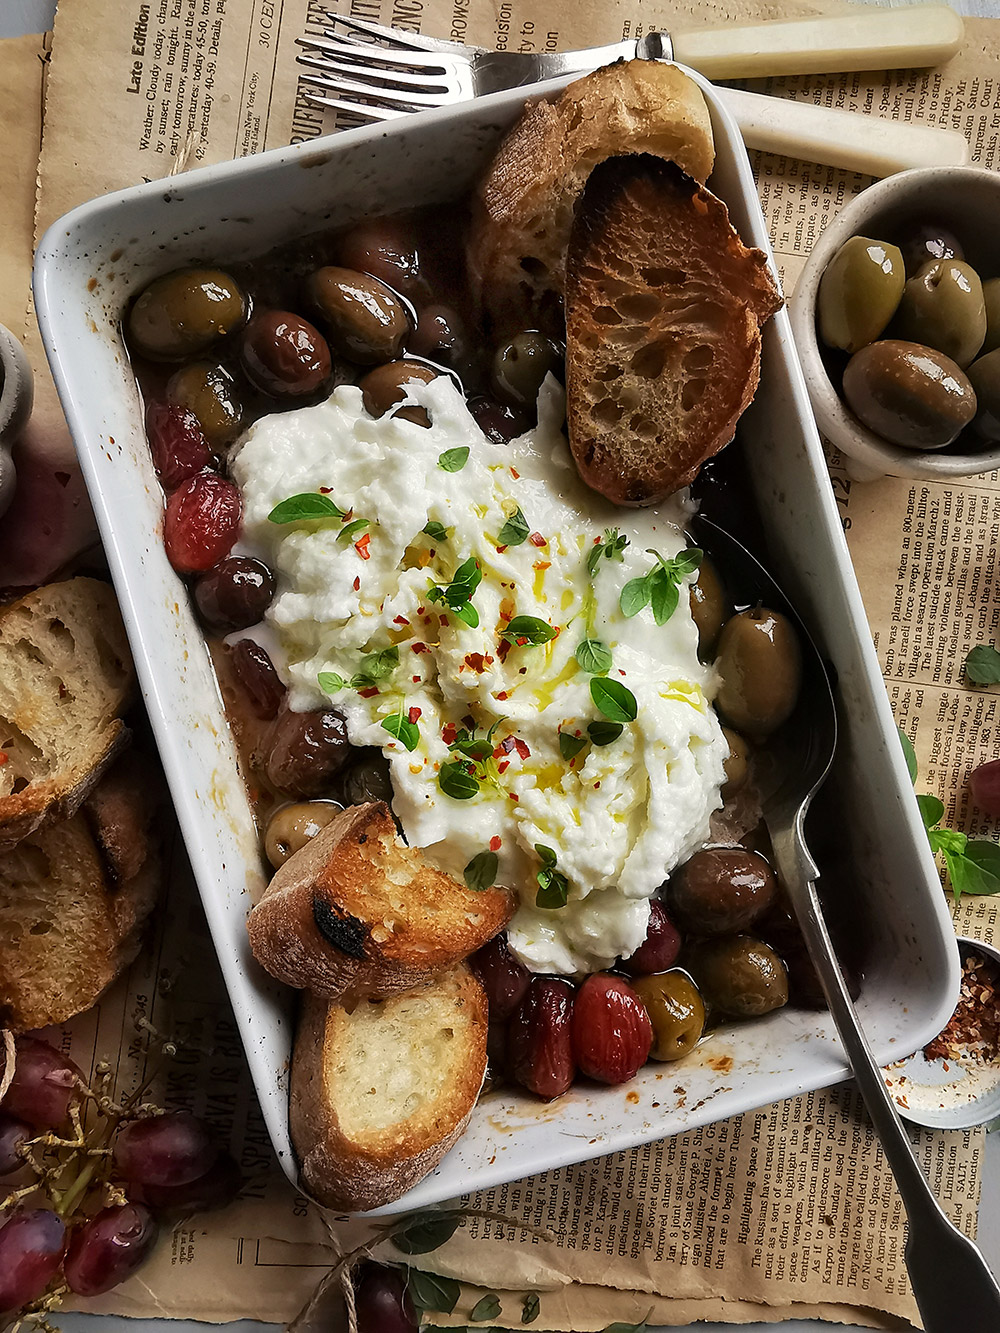 Roasted grapes and olives with burrata